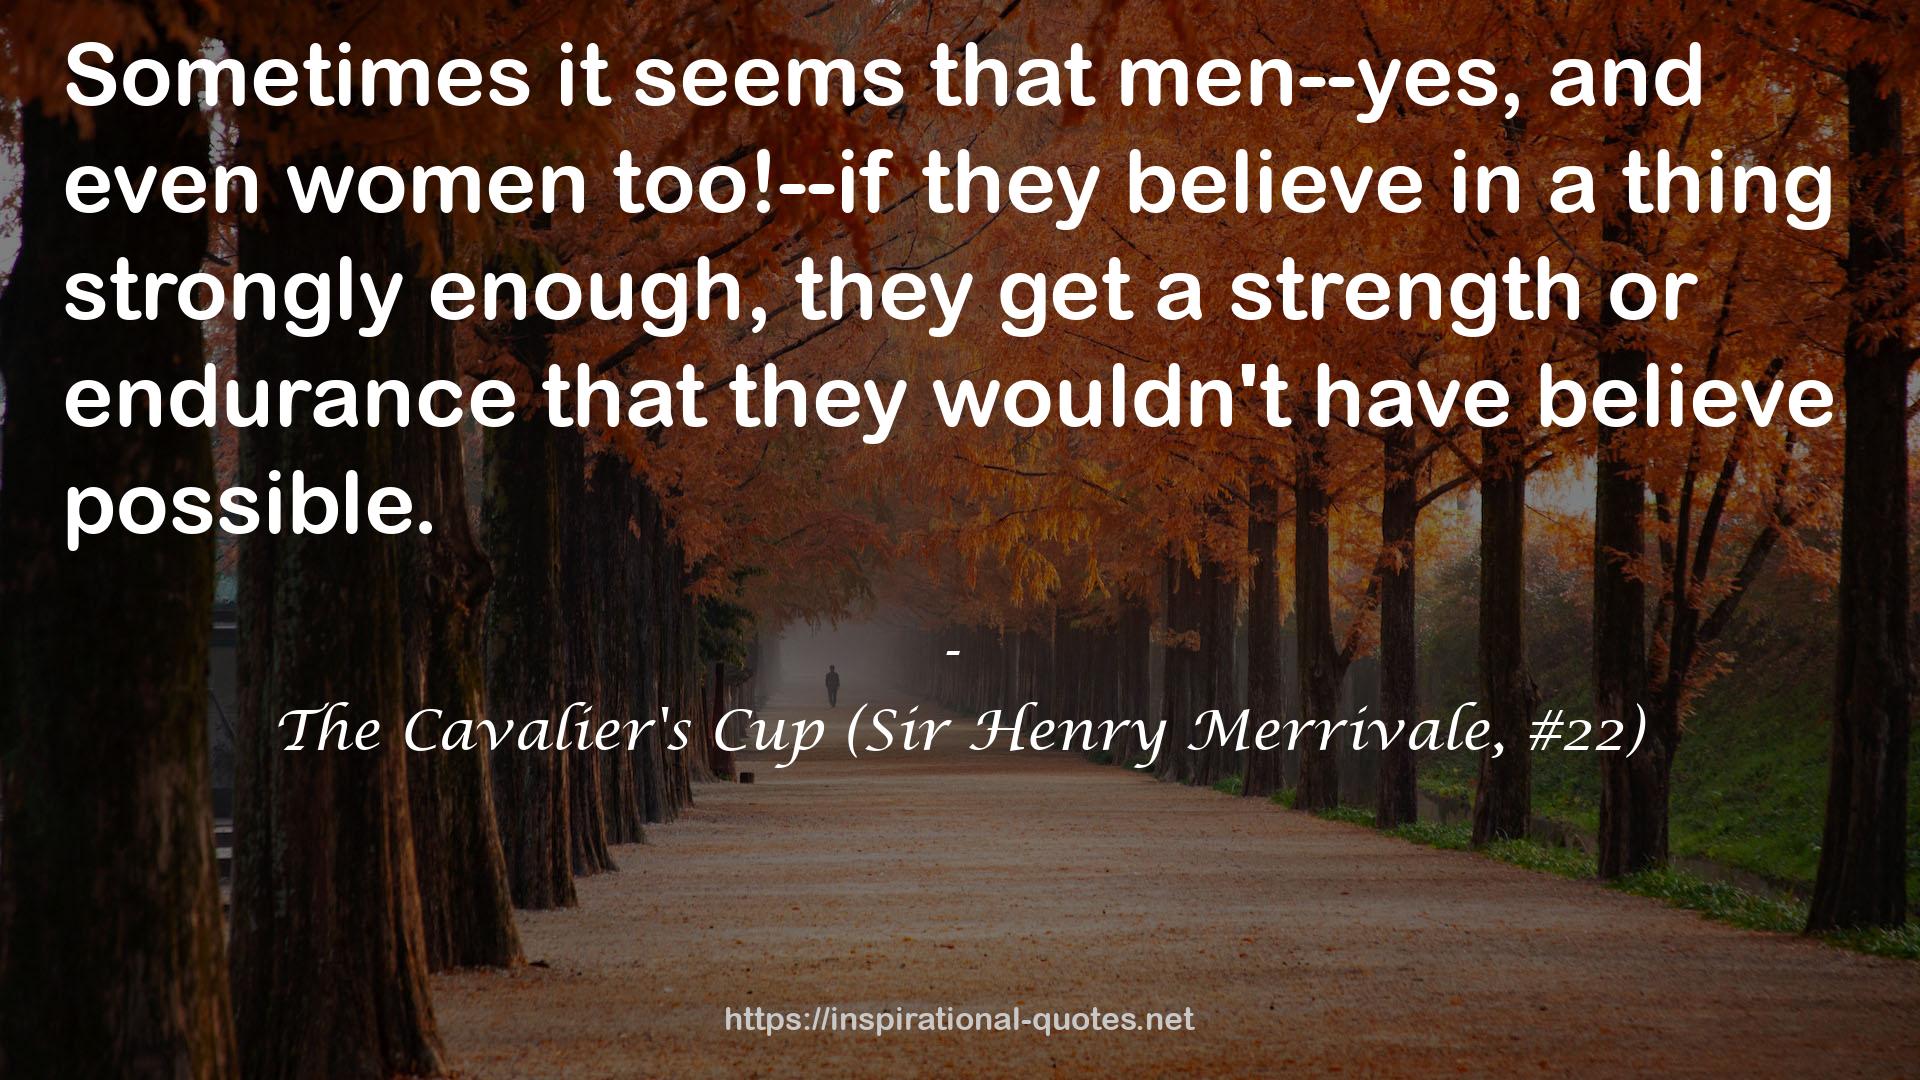 The Cavalier's Cup (Sir Henry Merrivale, #22) QUOTES